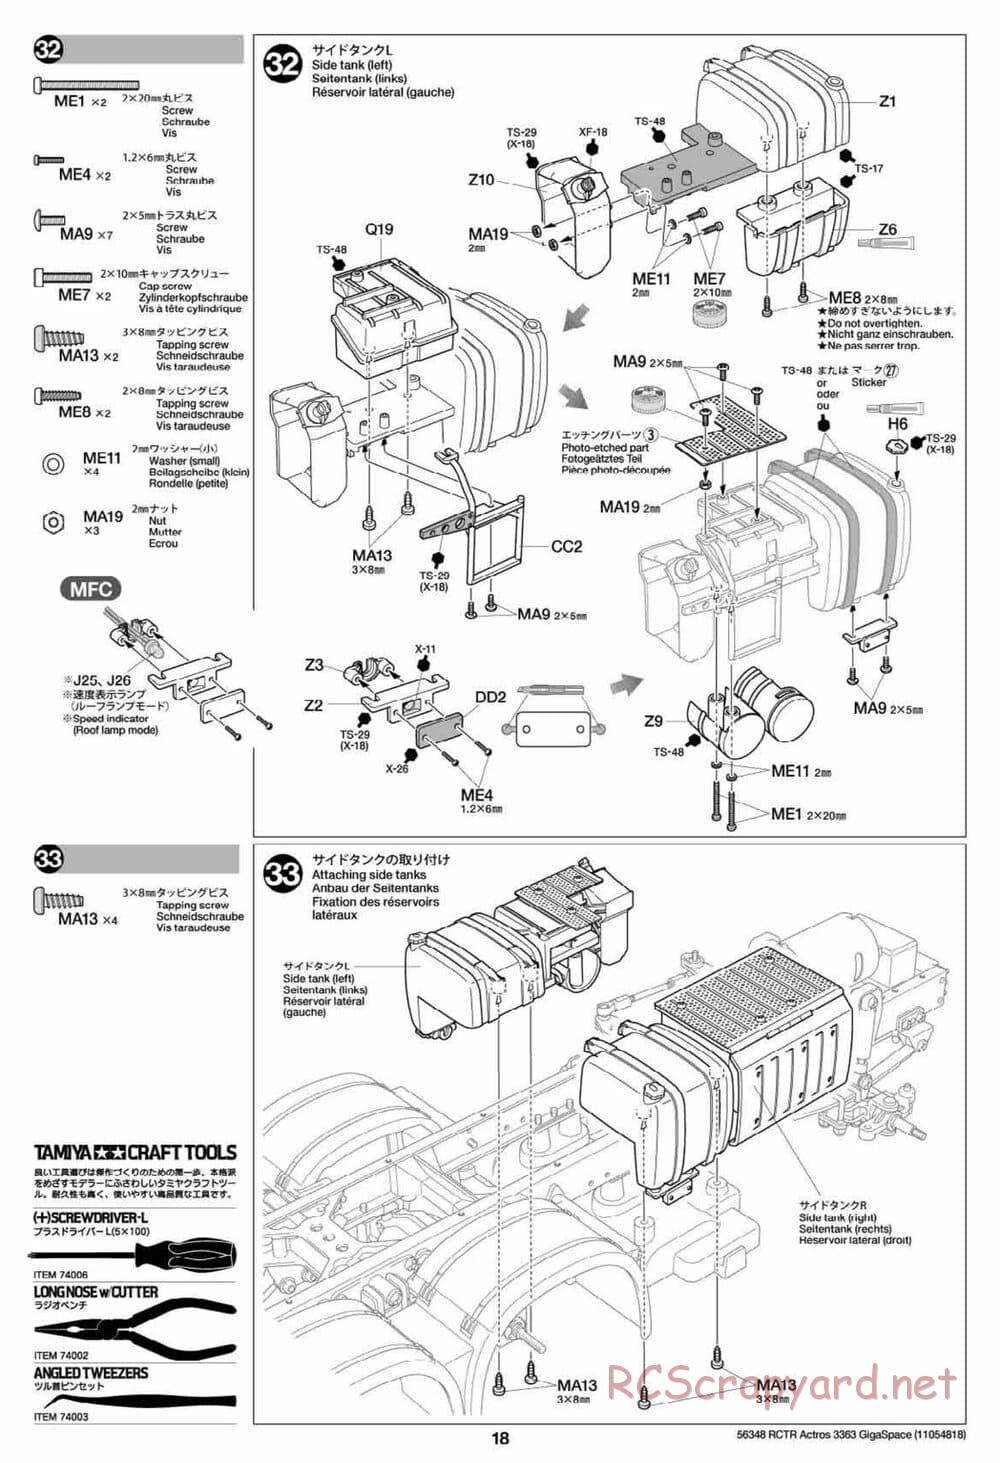 Tamiya - Mercedes-Benz Actros 3363 6x4 GigaSpace Tractor Truck Chassis - Manual - Page 18